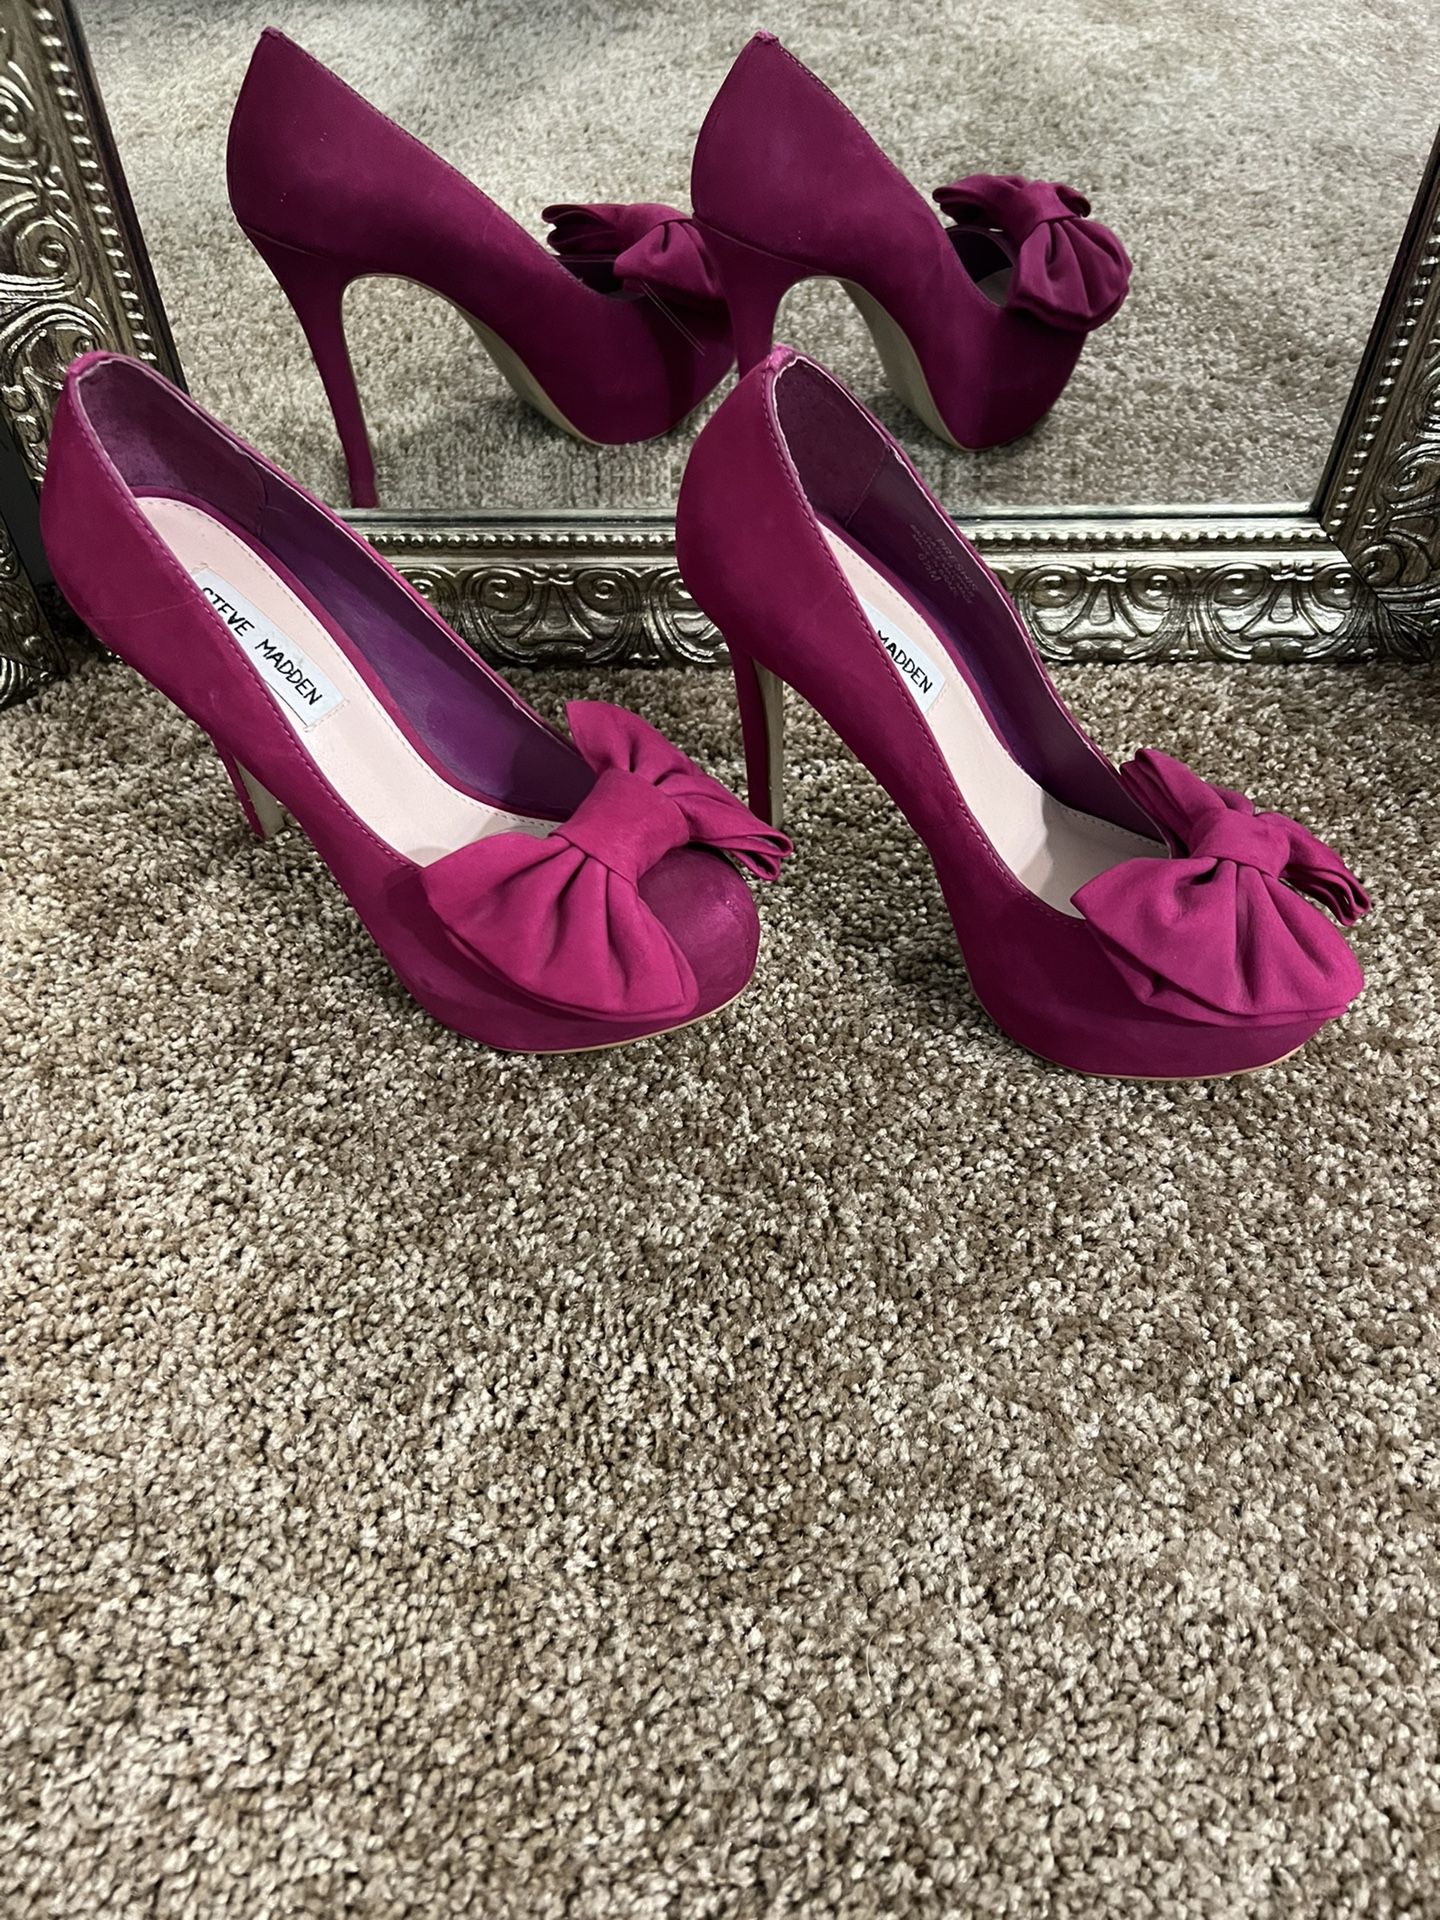 Steve Madden - Gorgeous 🤩 Hot Pink Shoes - Like New